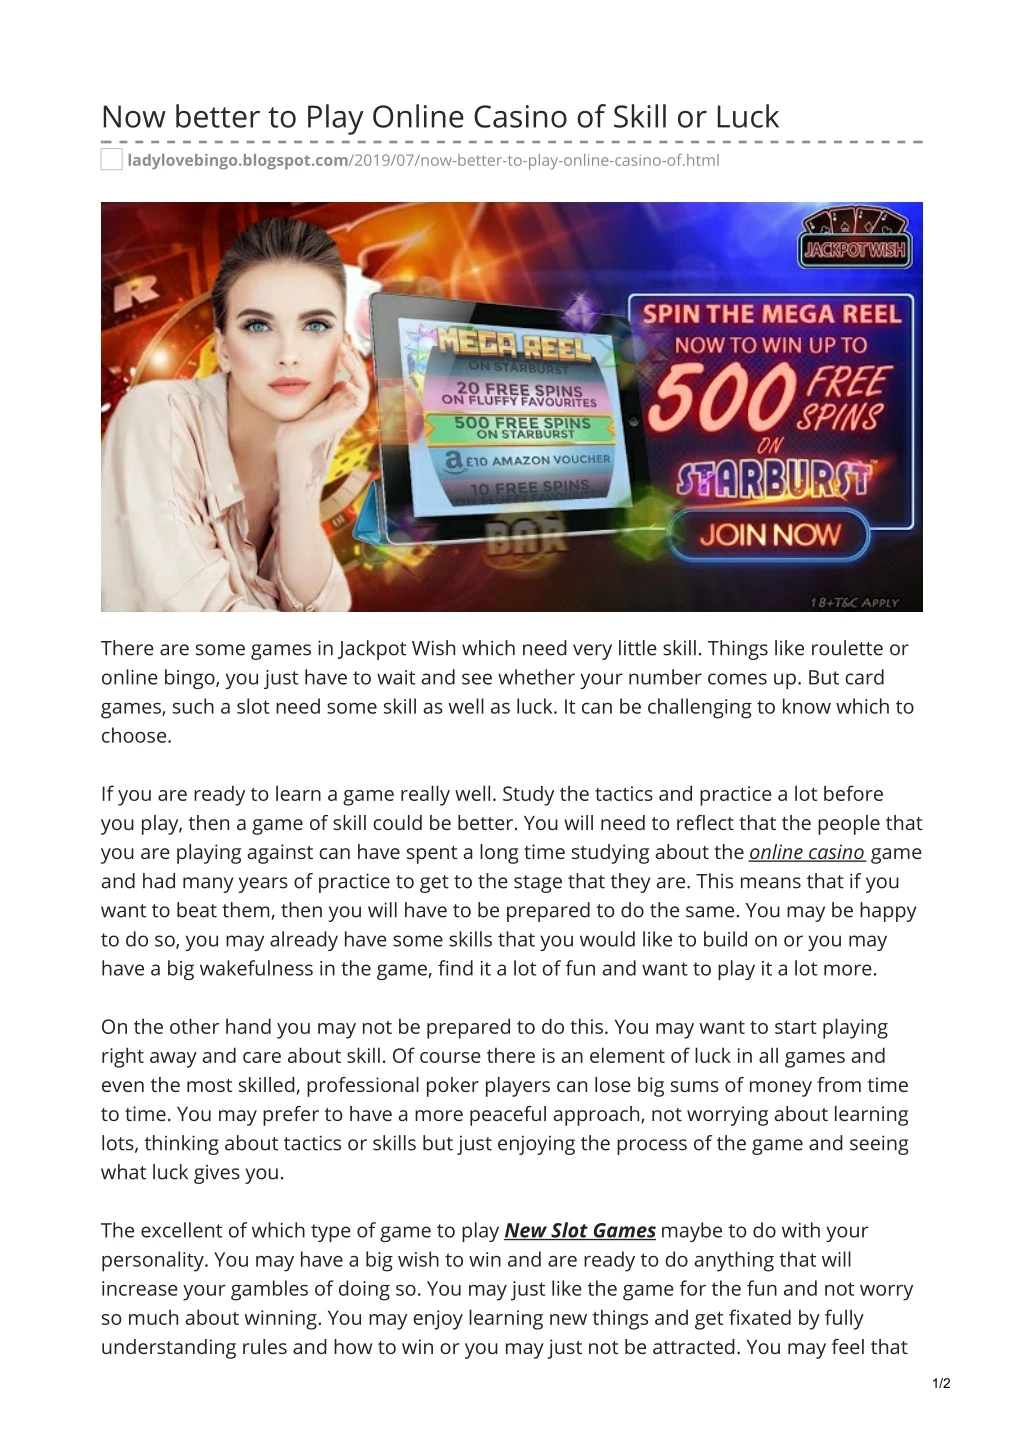 now better to play online casino of skill or luck